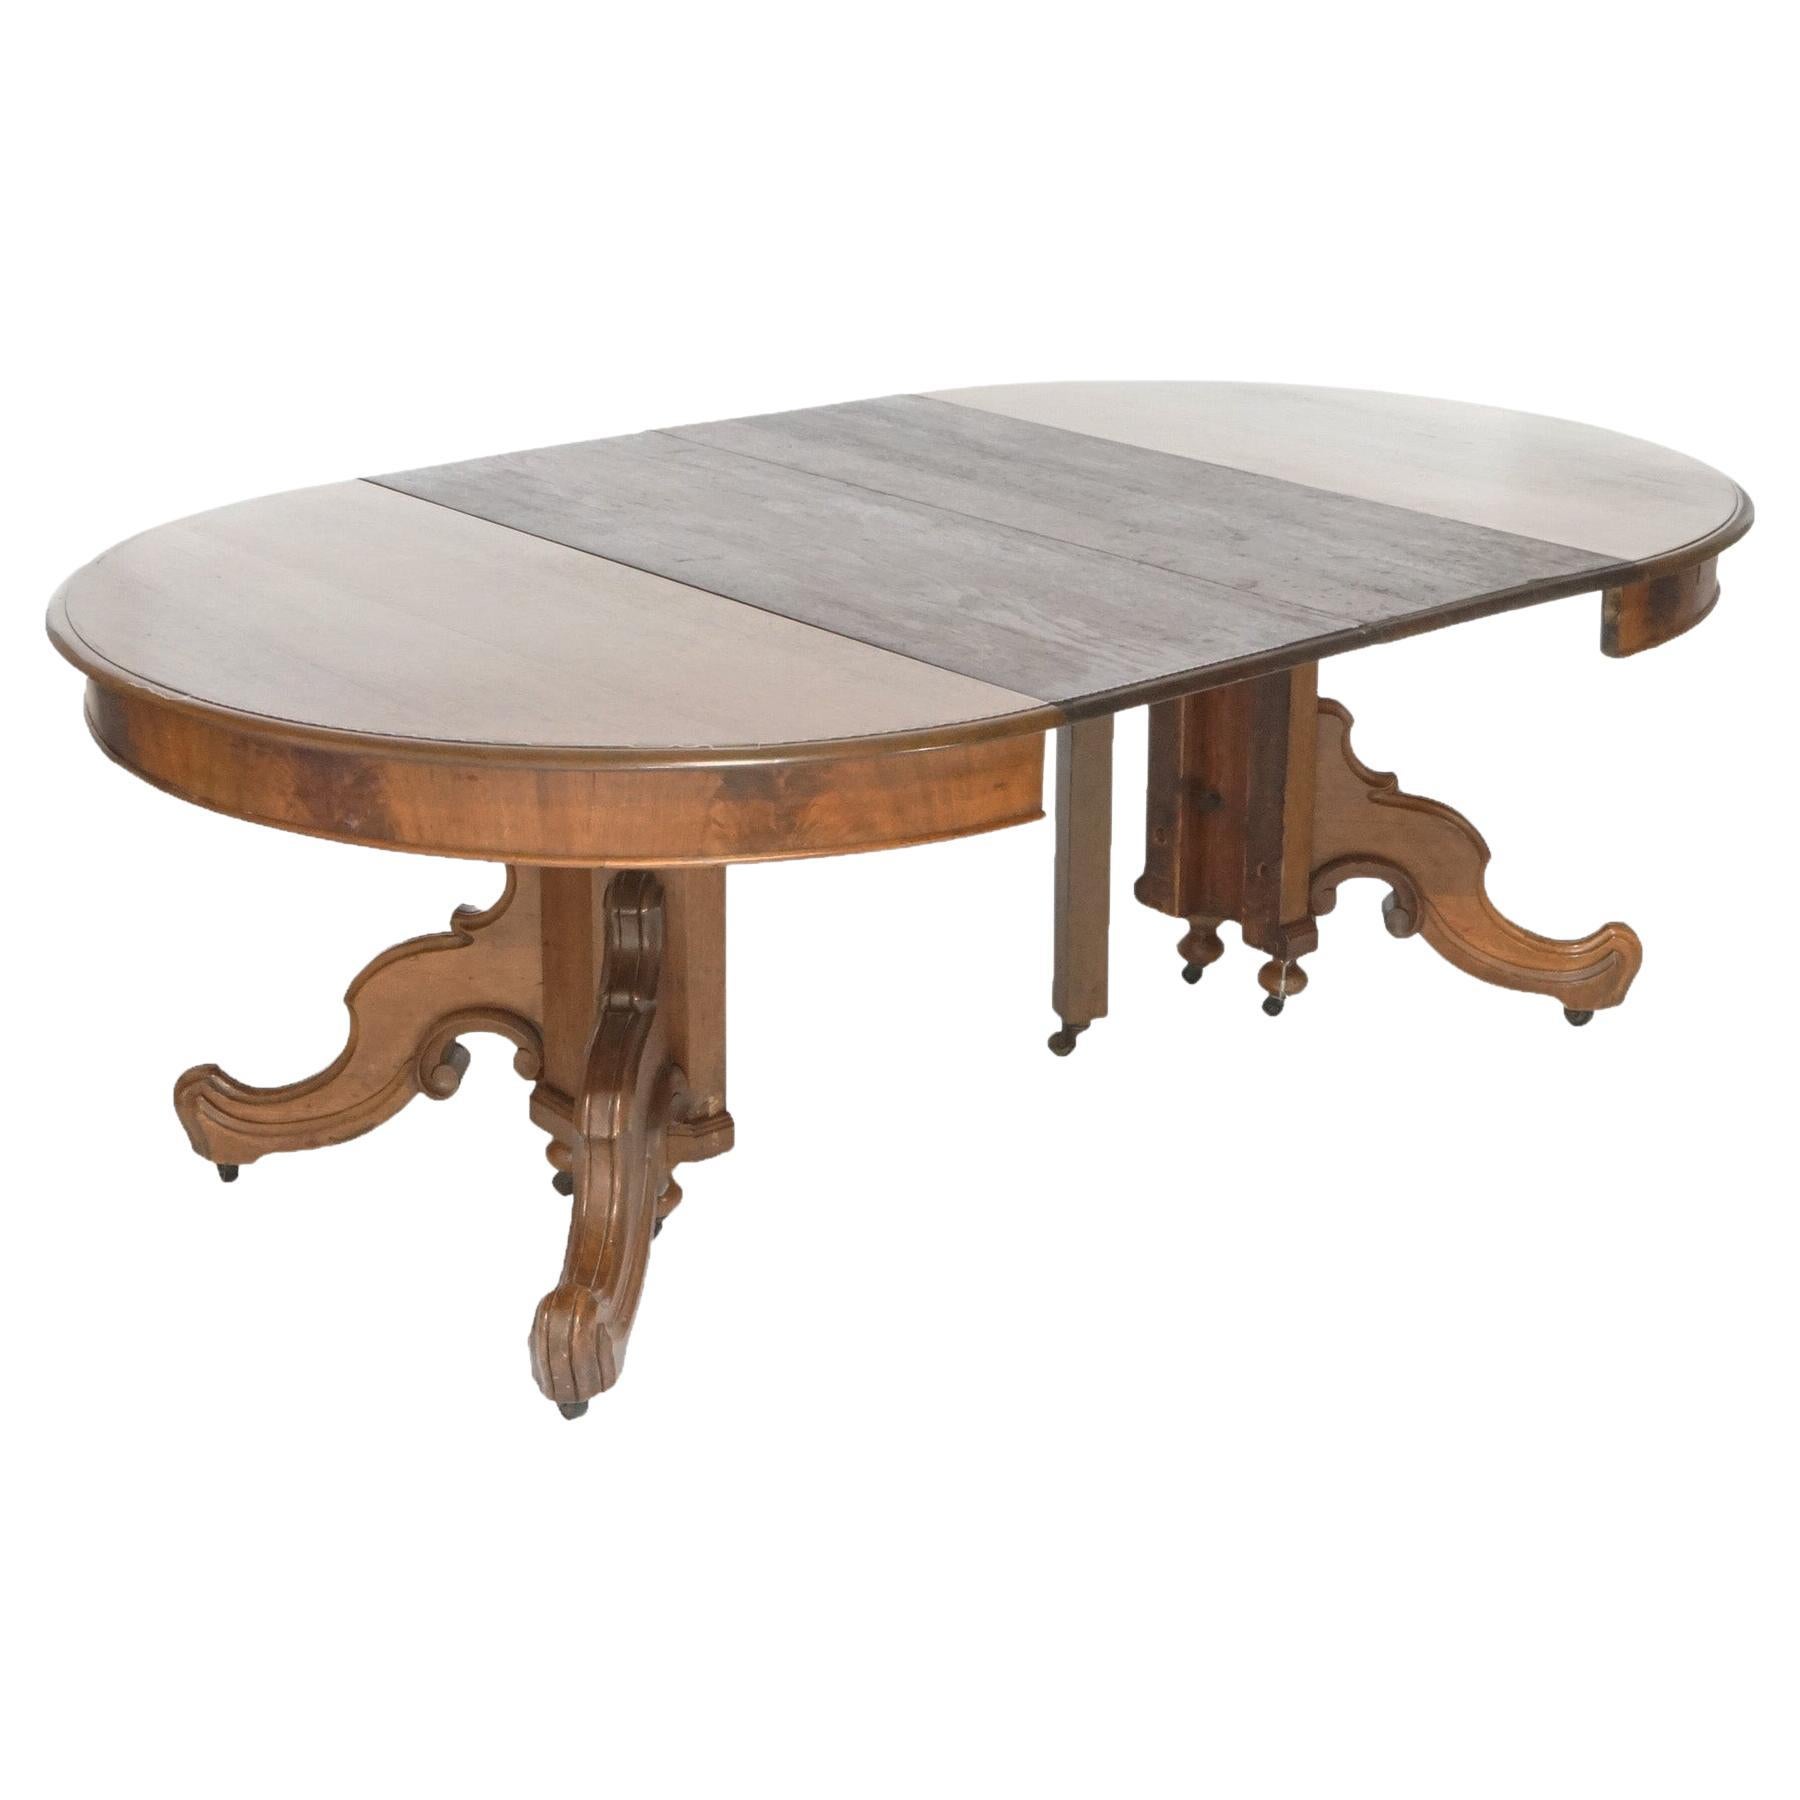 An antique Victorian dining table offers walnut construction with round top extending to accept six leaves, over split pedestal base having scroll form legs, c1890.

Measures- 29.5''H x 51.5''W x 51.5''D; with all leaves 172.5'' (14' 4.5''); 1